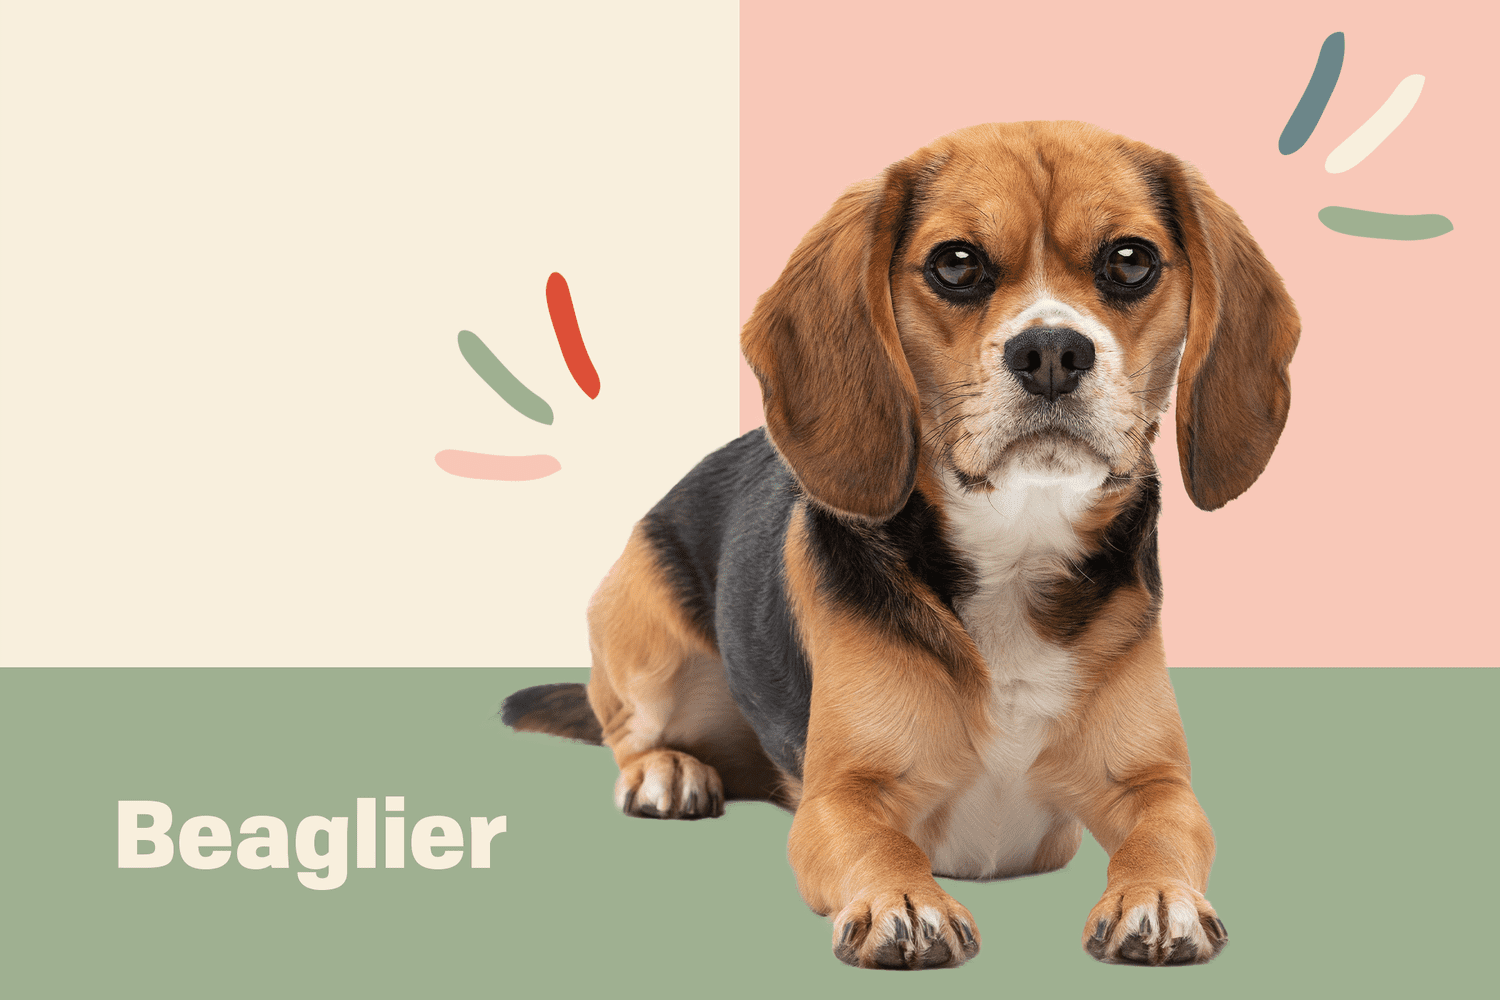 Beaglier - Dog Breeds - Daily Paws